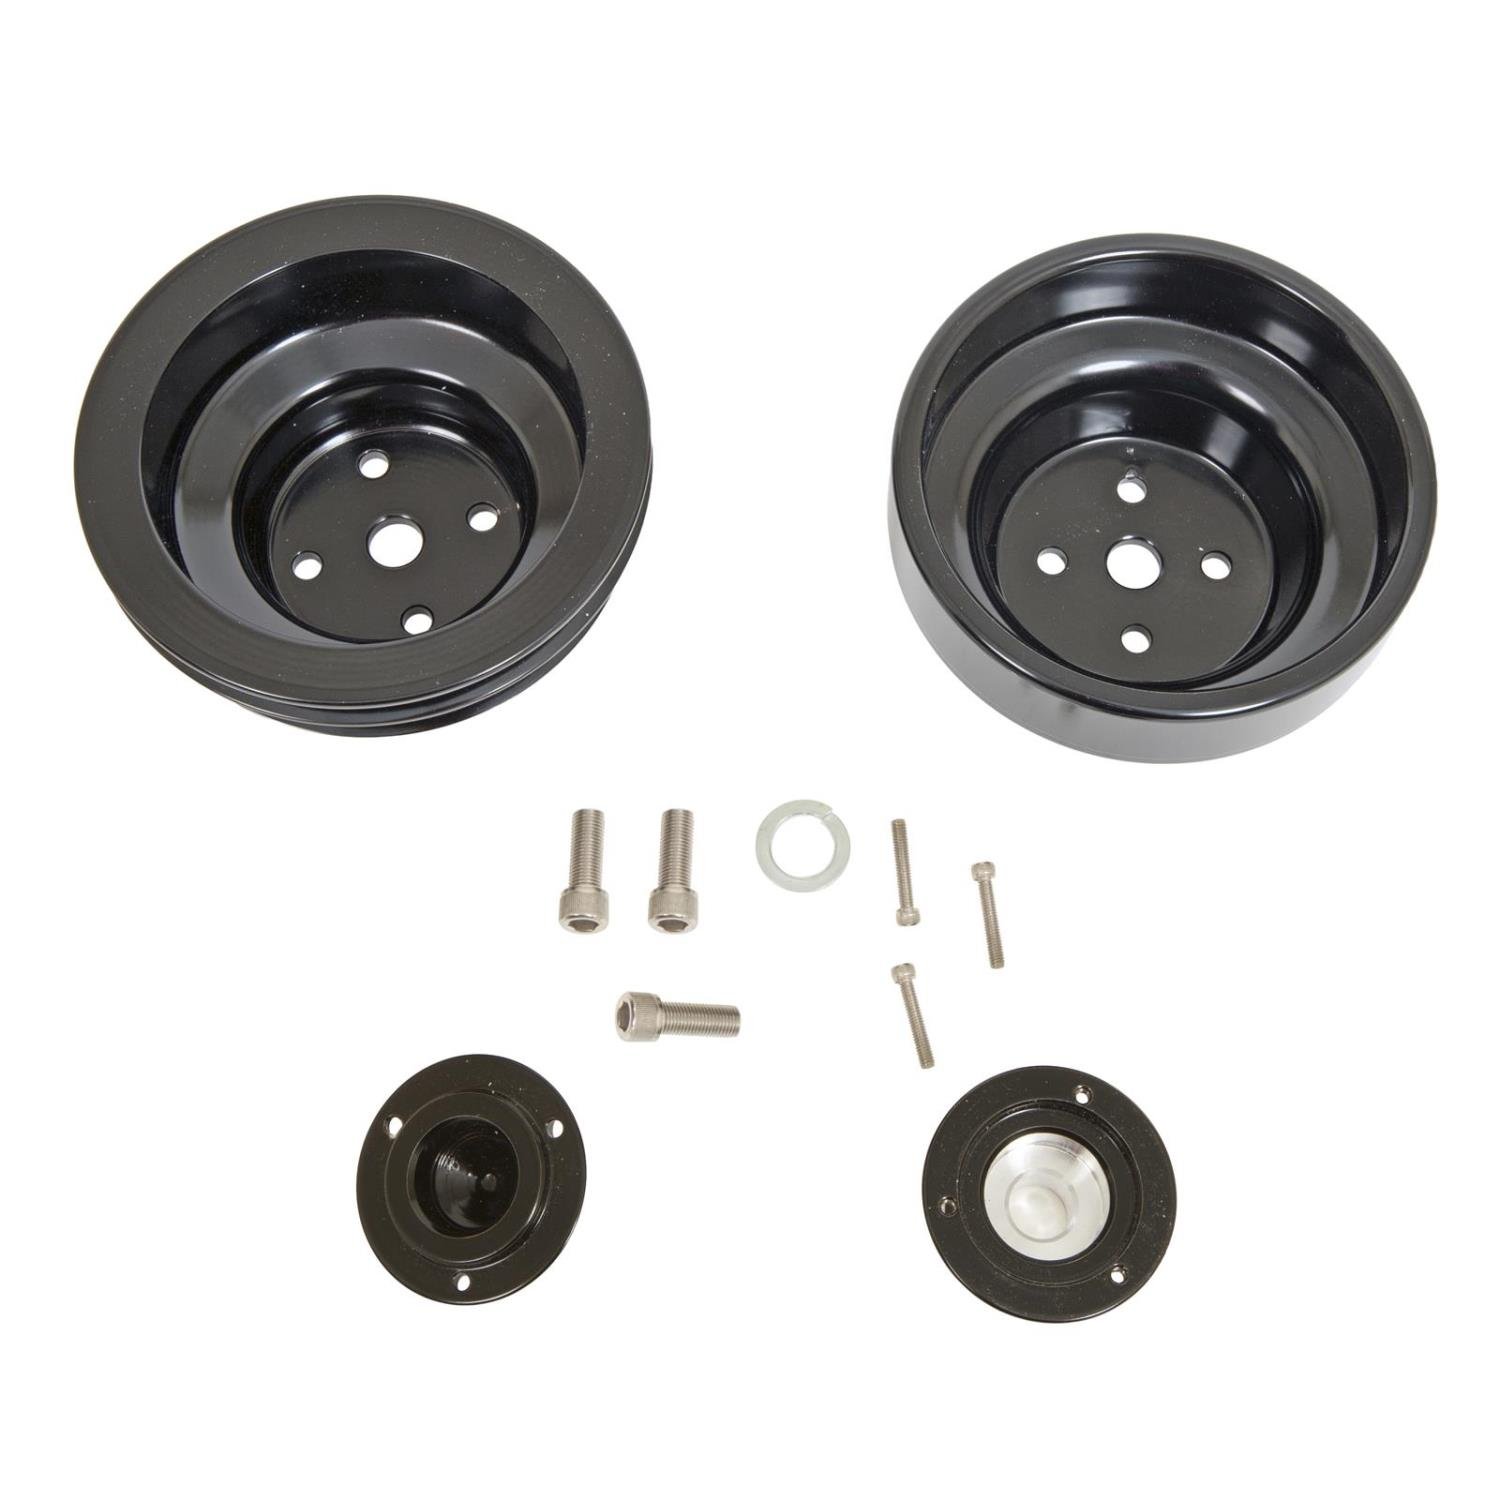 Chevy/GM Truck Pulley Set - Power & Amp Series 1988-95 4.3L V6, 305-350 with External Alternator Fan